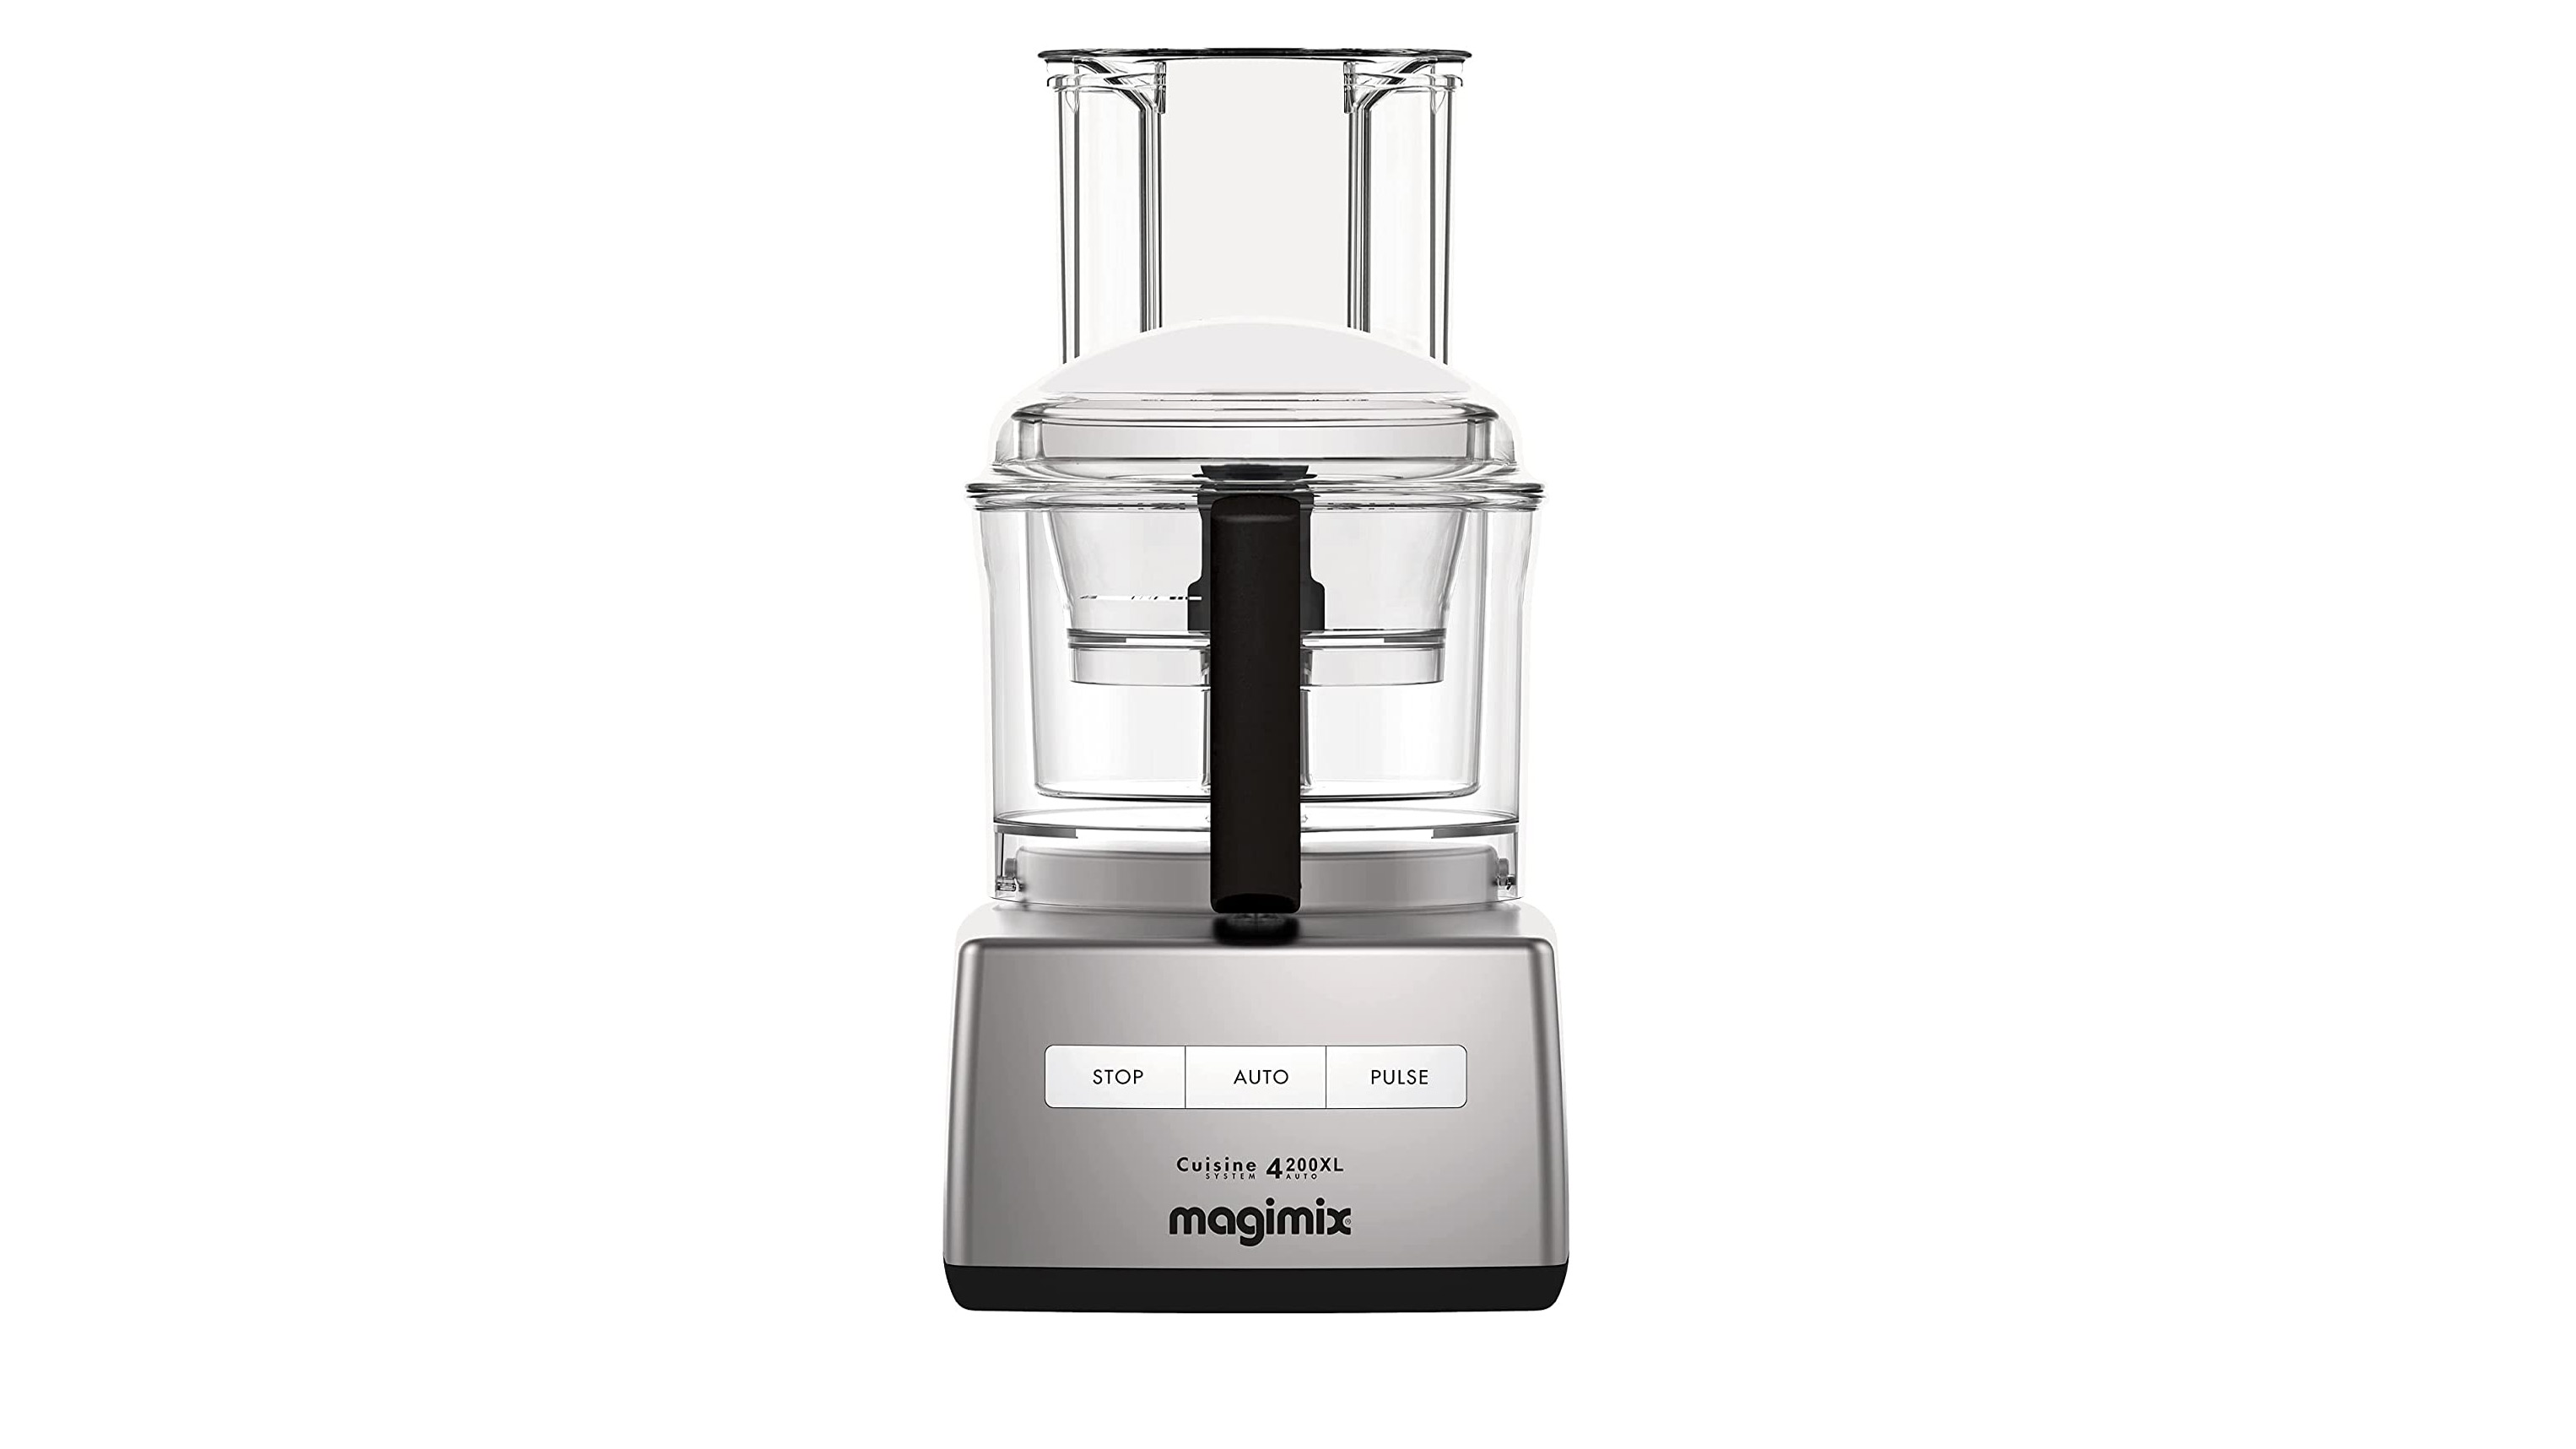 The Magimix 4200XL food processor on a white background